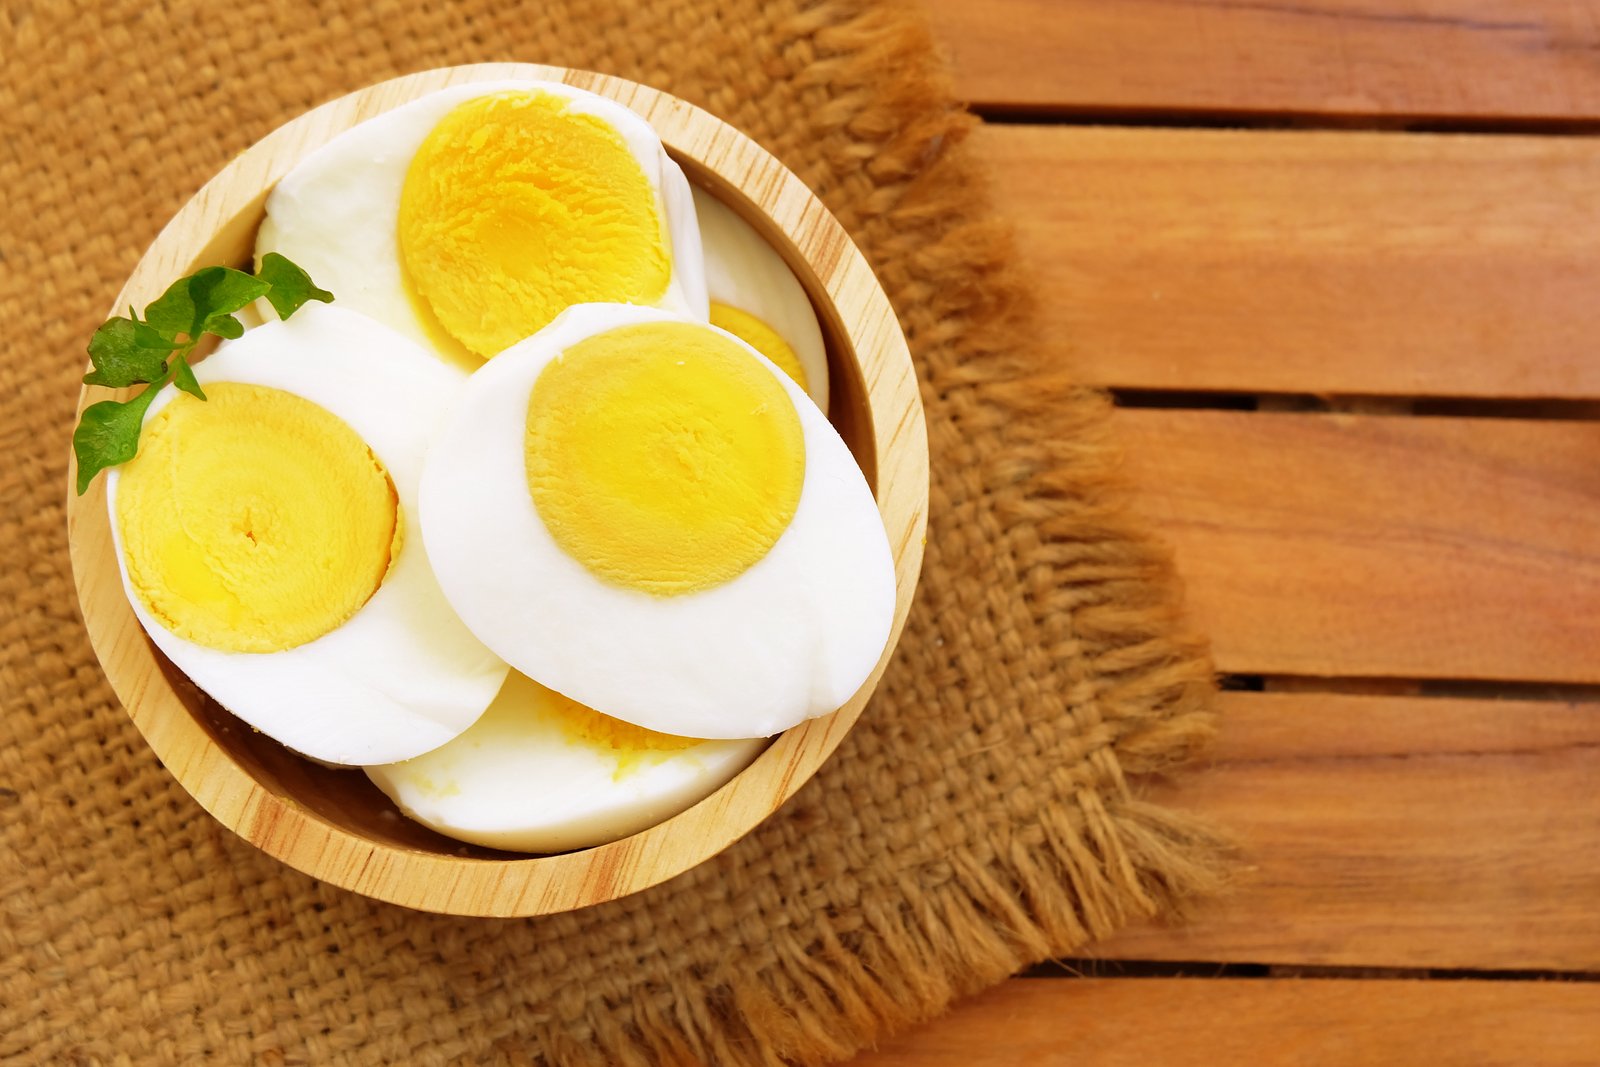 How To Boil Eggs At Home - Boiled Eggs Recipe